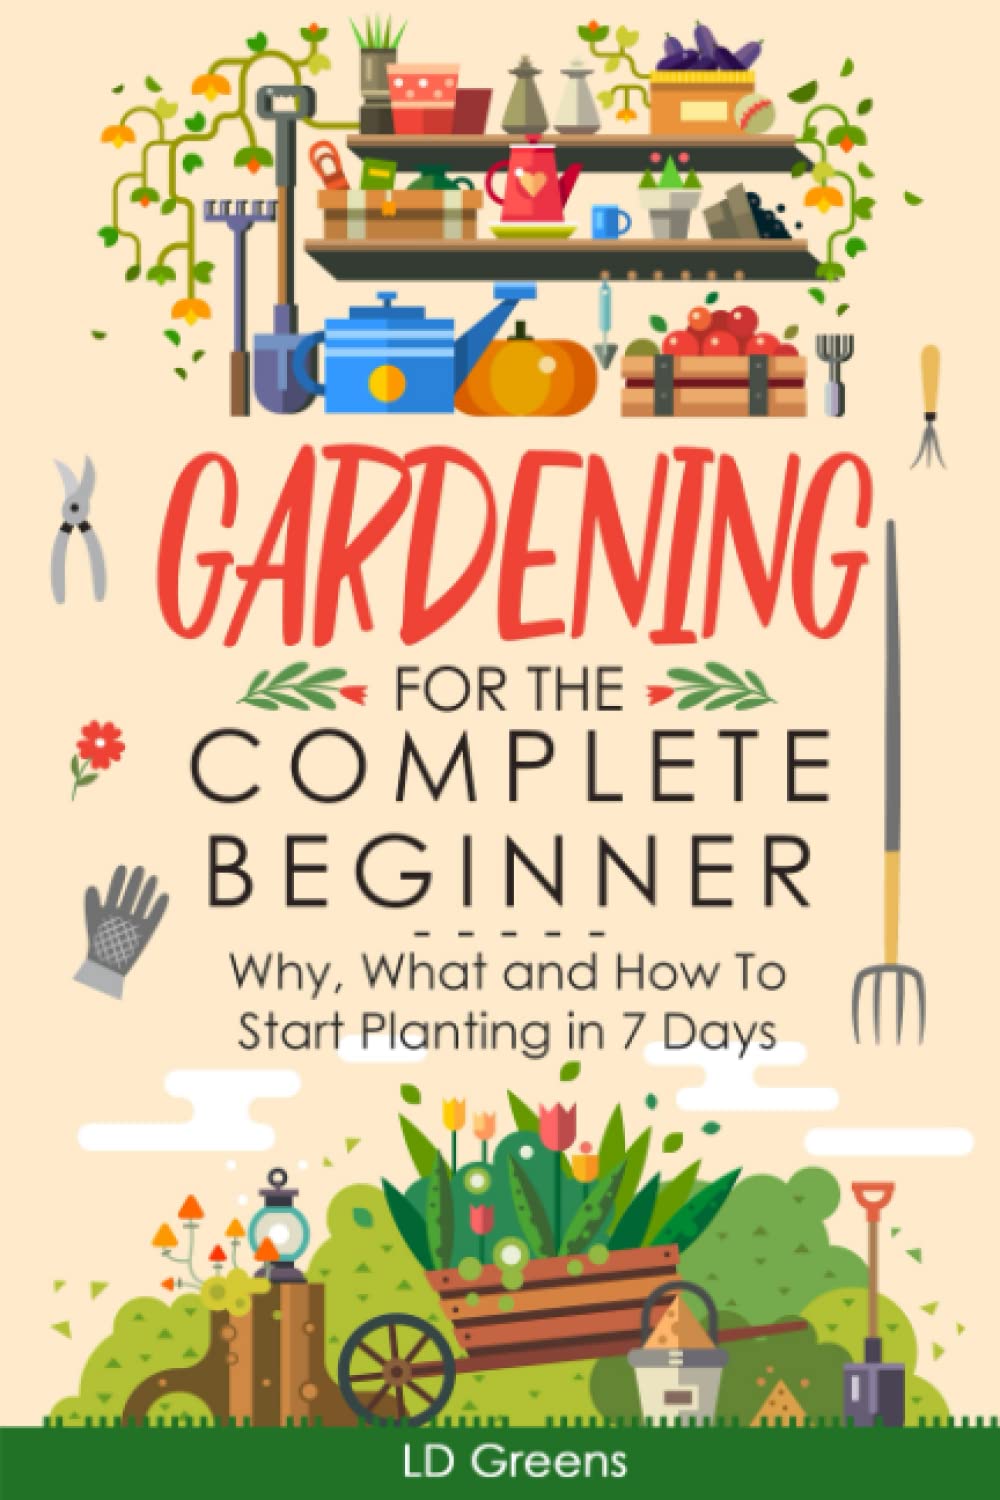 Gardening For Complete Beginners book cover